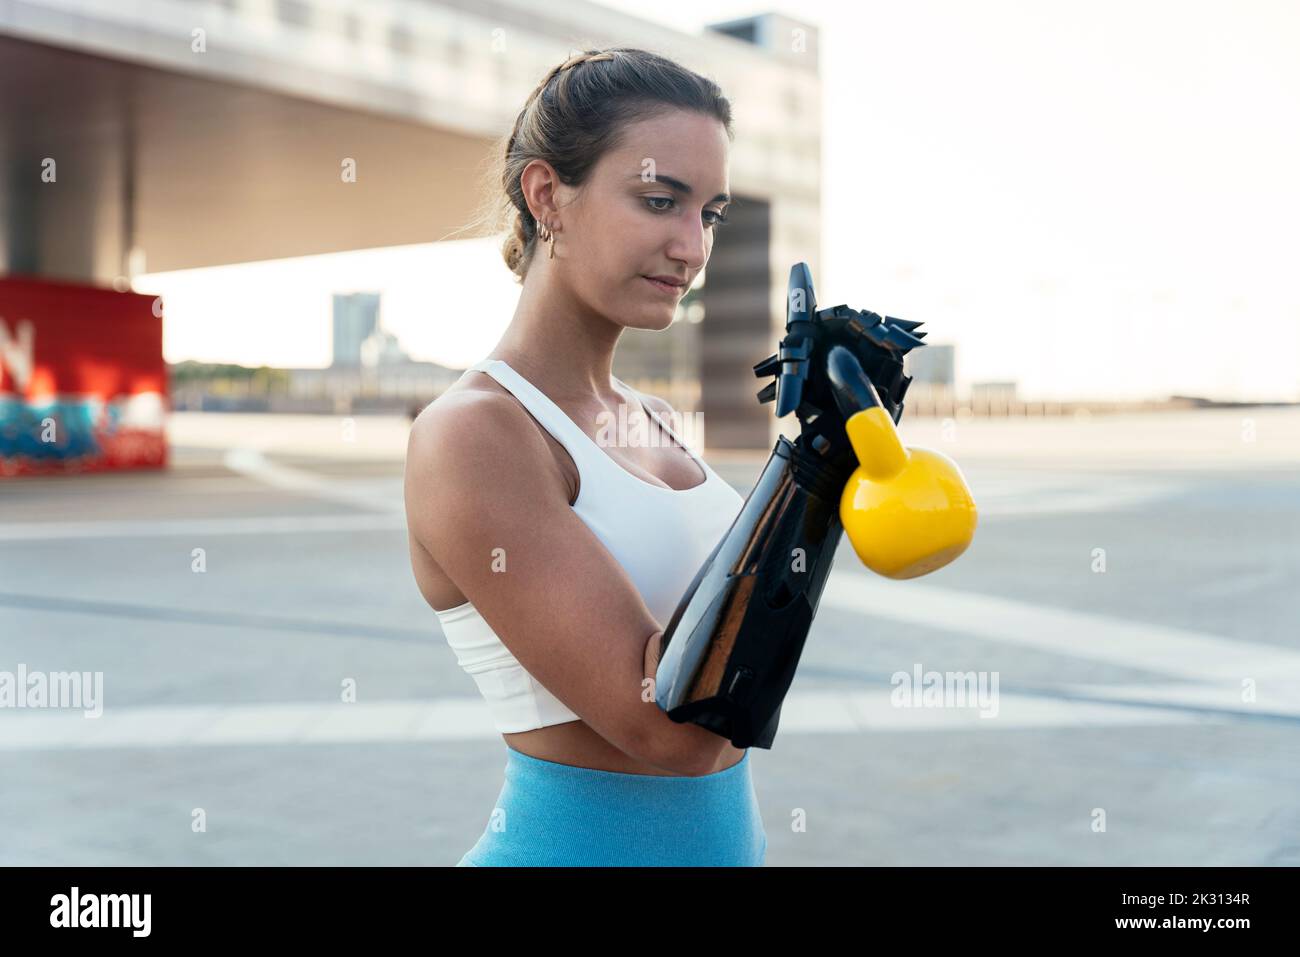 Young woman with arm prosthesis exercising with kettlebell Stock Photo